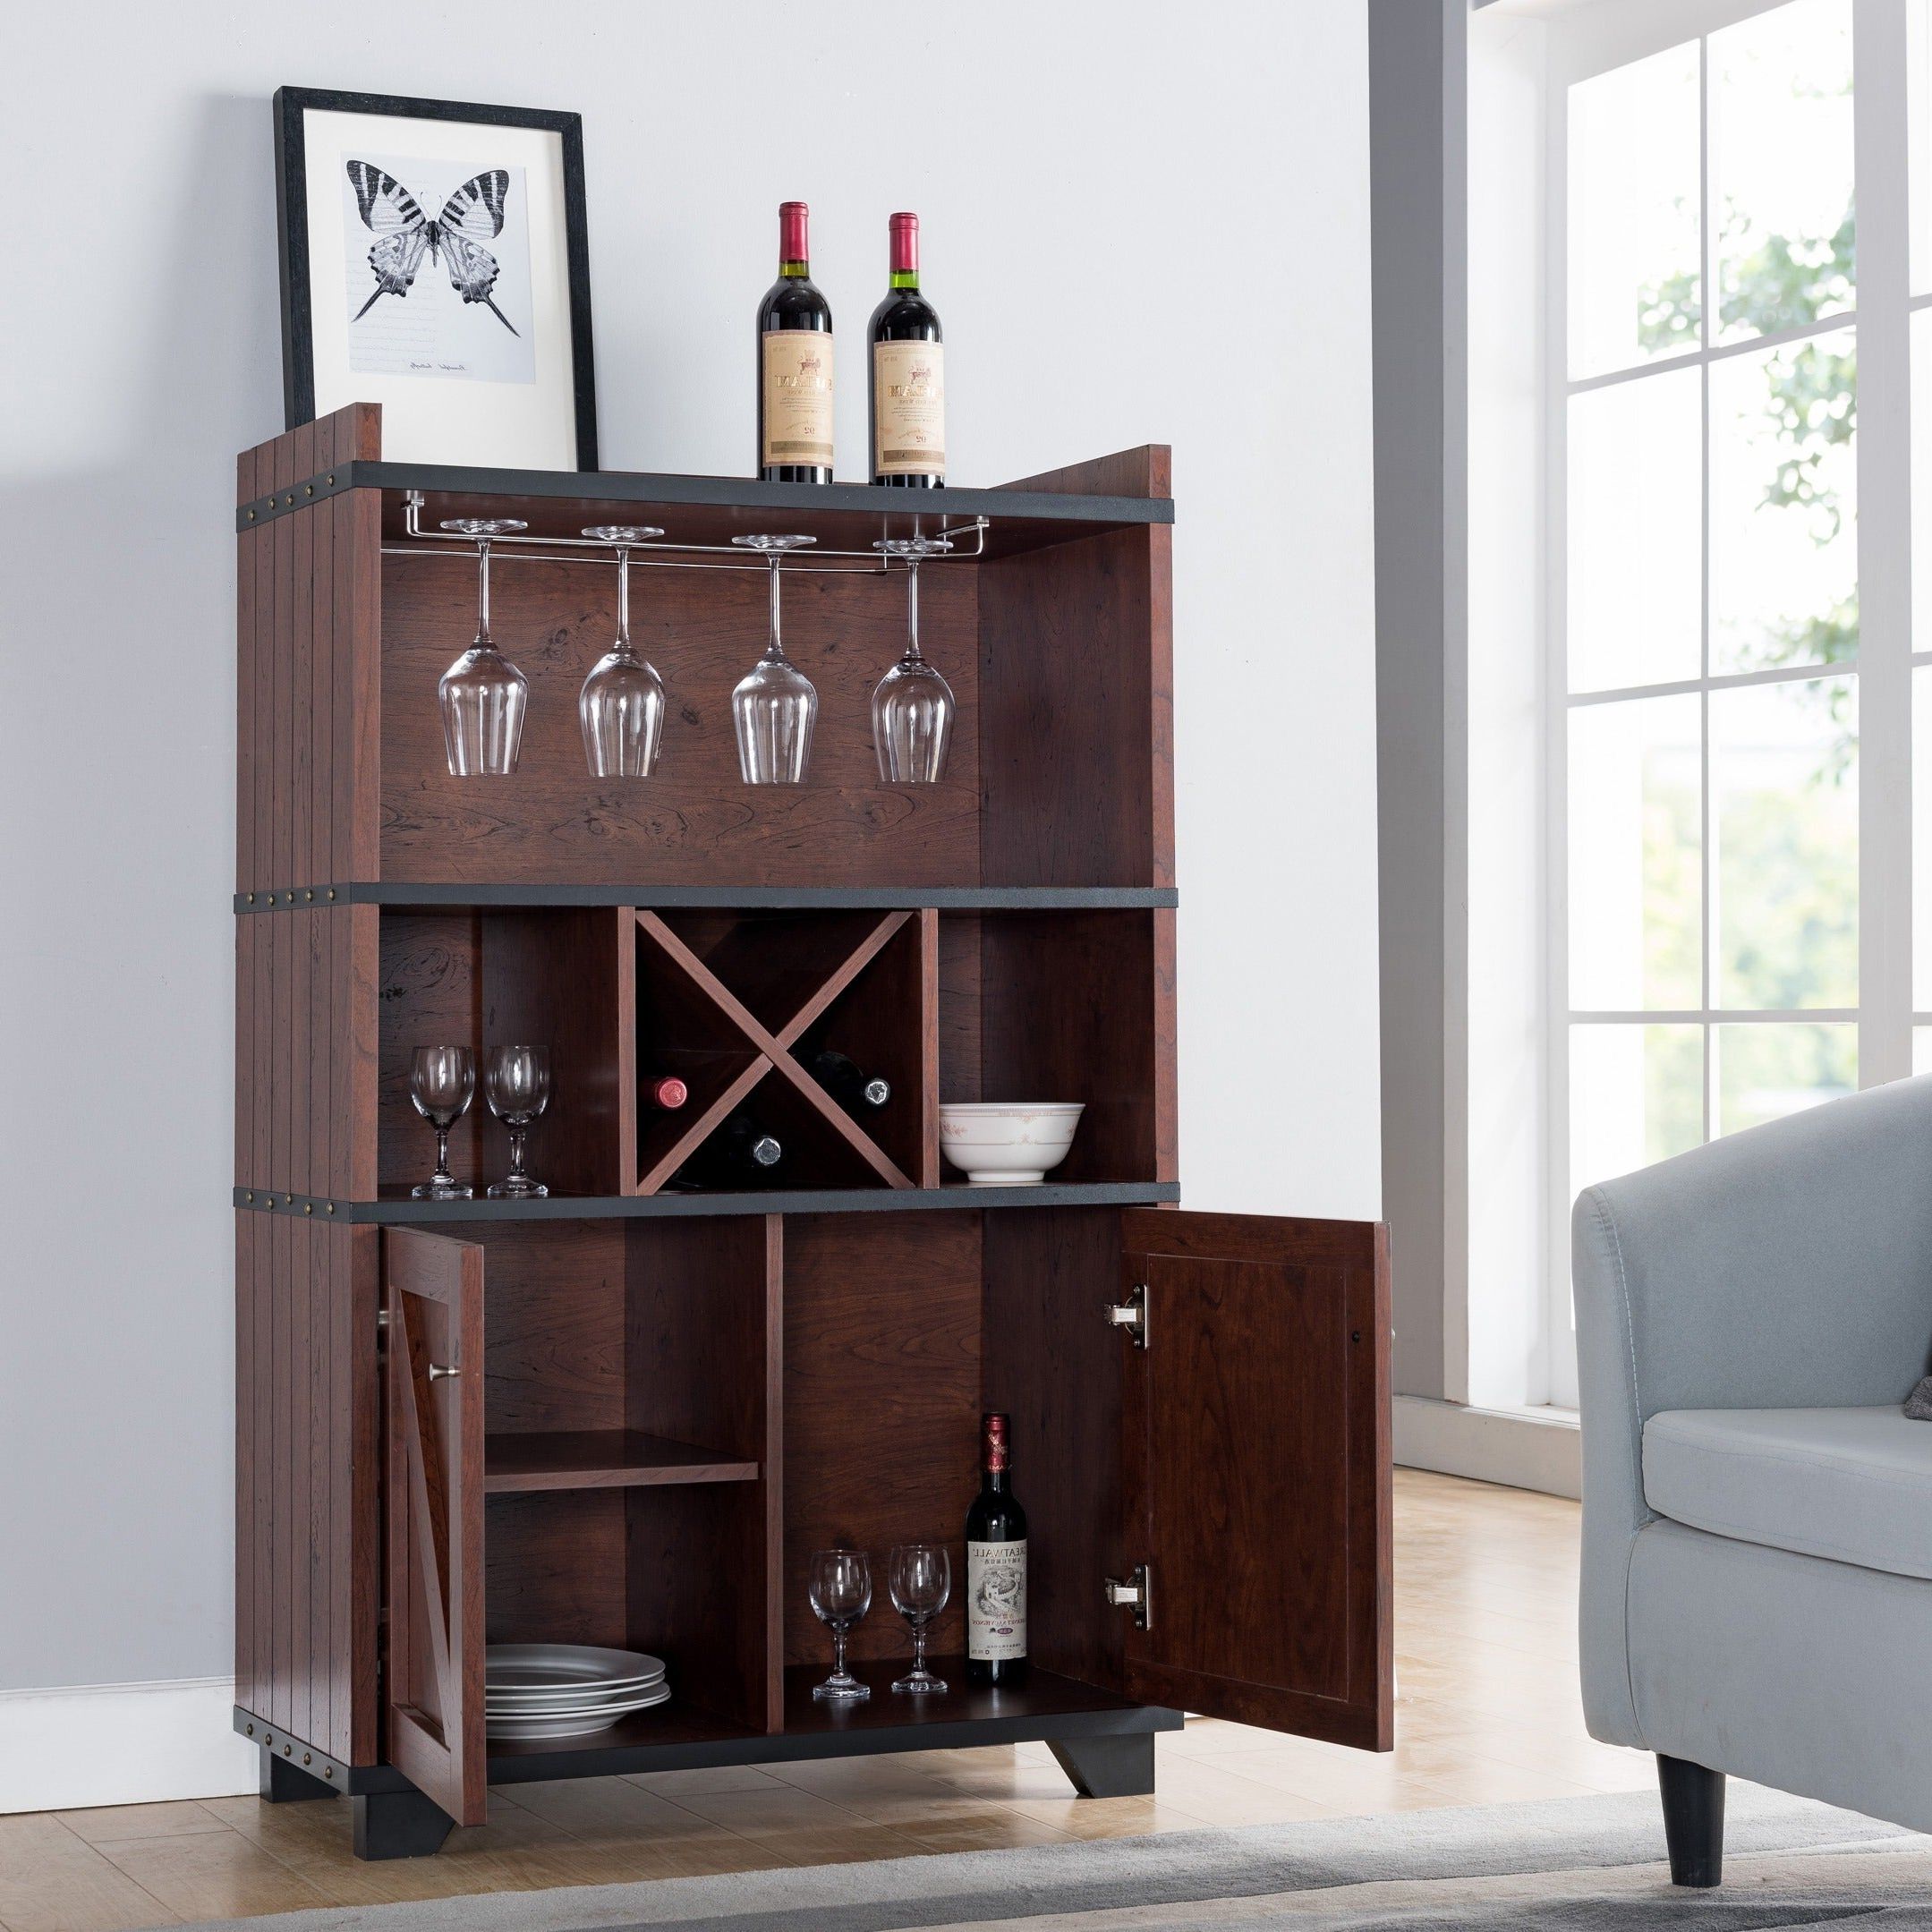 Furniture Of America Wesleyan Rustic Farmhouse Wine Cabinet Buffet Intended For Wooden Buffets With Two Side Door Storage Cabinets And Stemware Rack (Gallery 3 of 20)